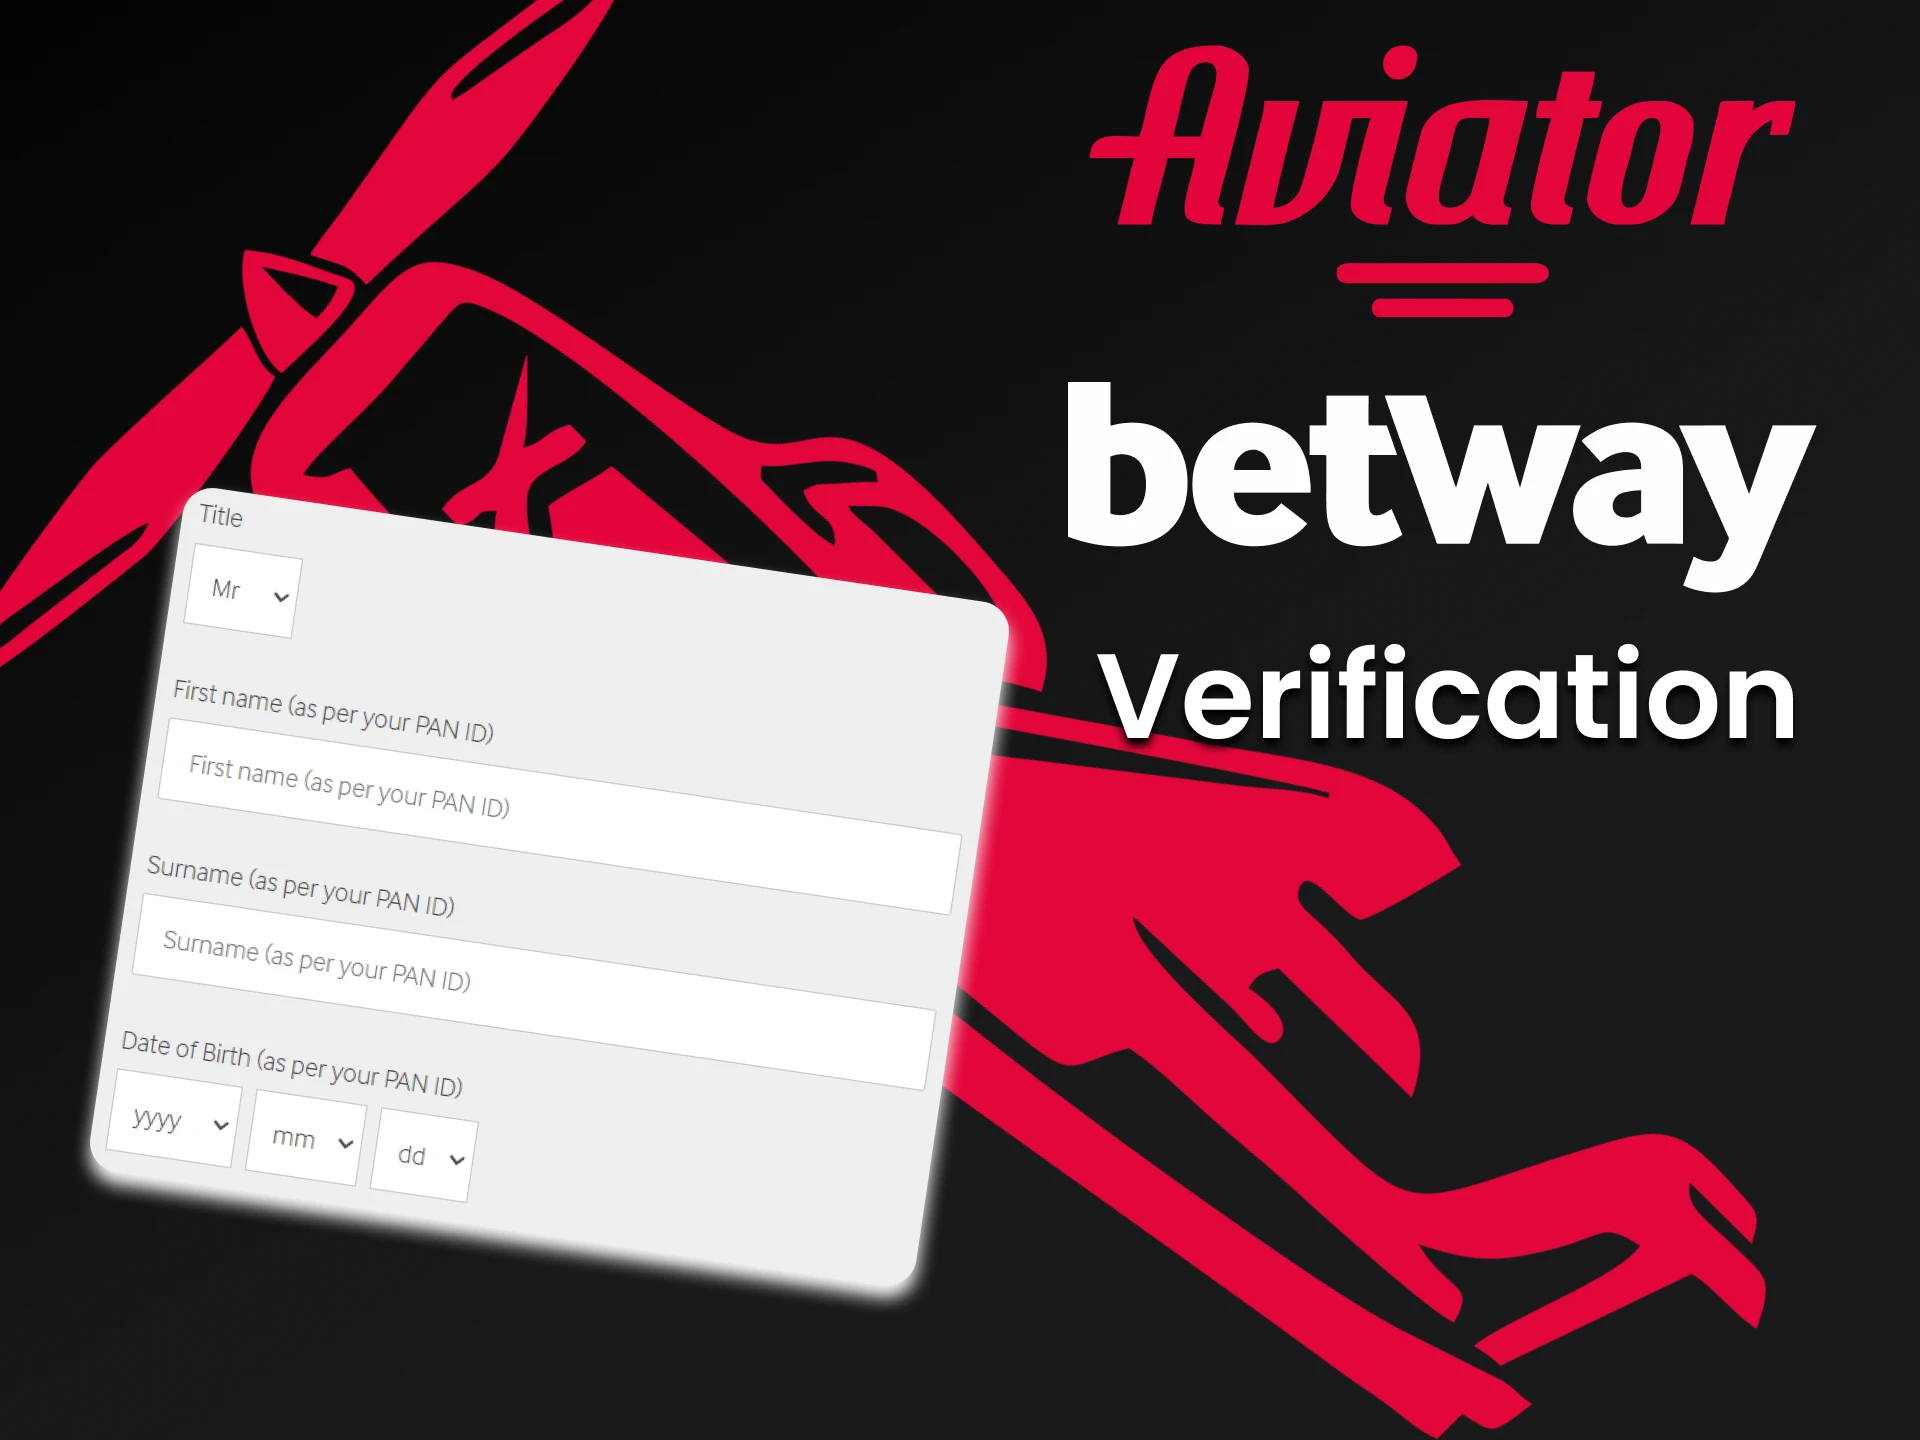 To fully use Betway, you must enter personal data.